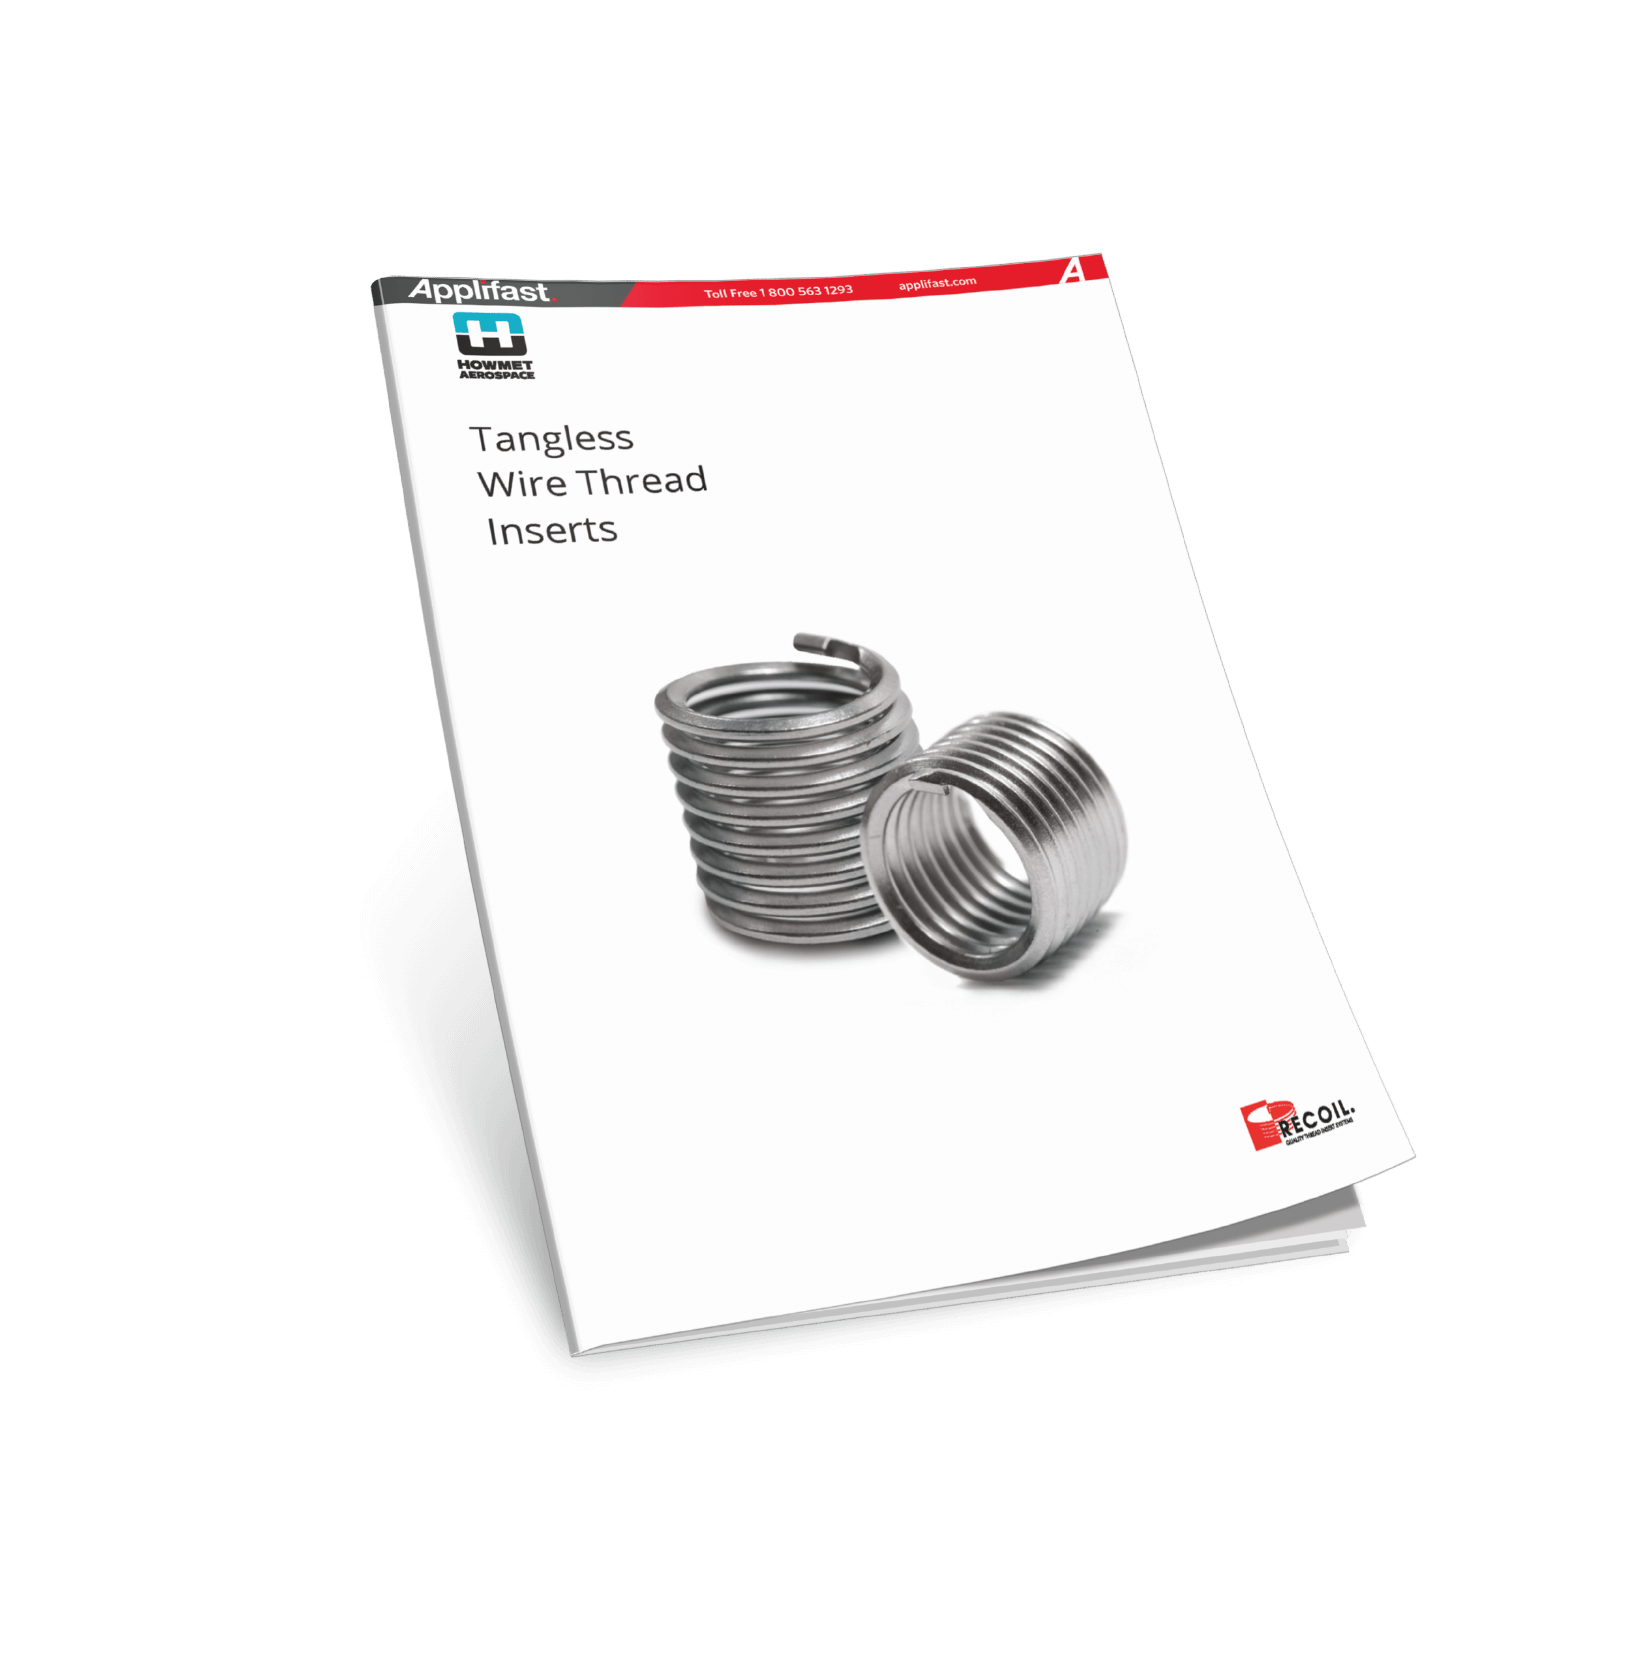 APPLIFAST - RECOIL TANGLESS WIRE THREAD INSERTS BROCHURE